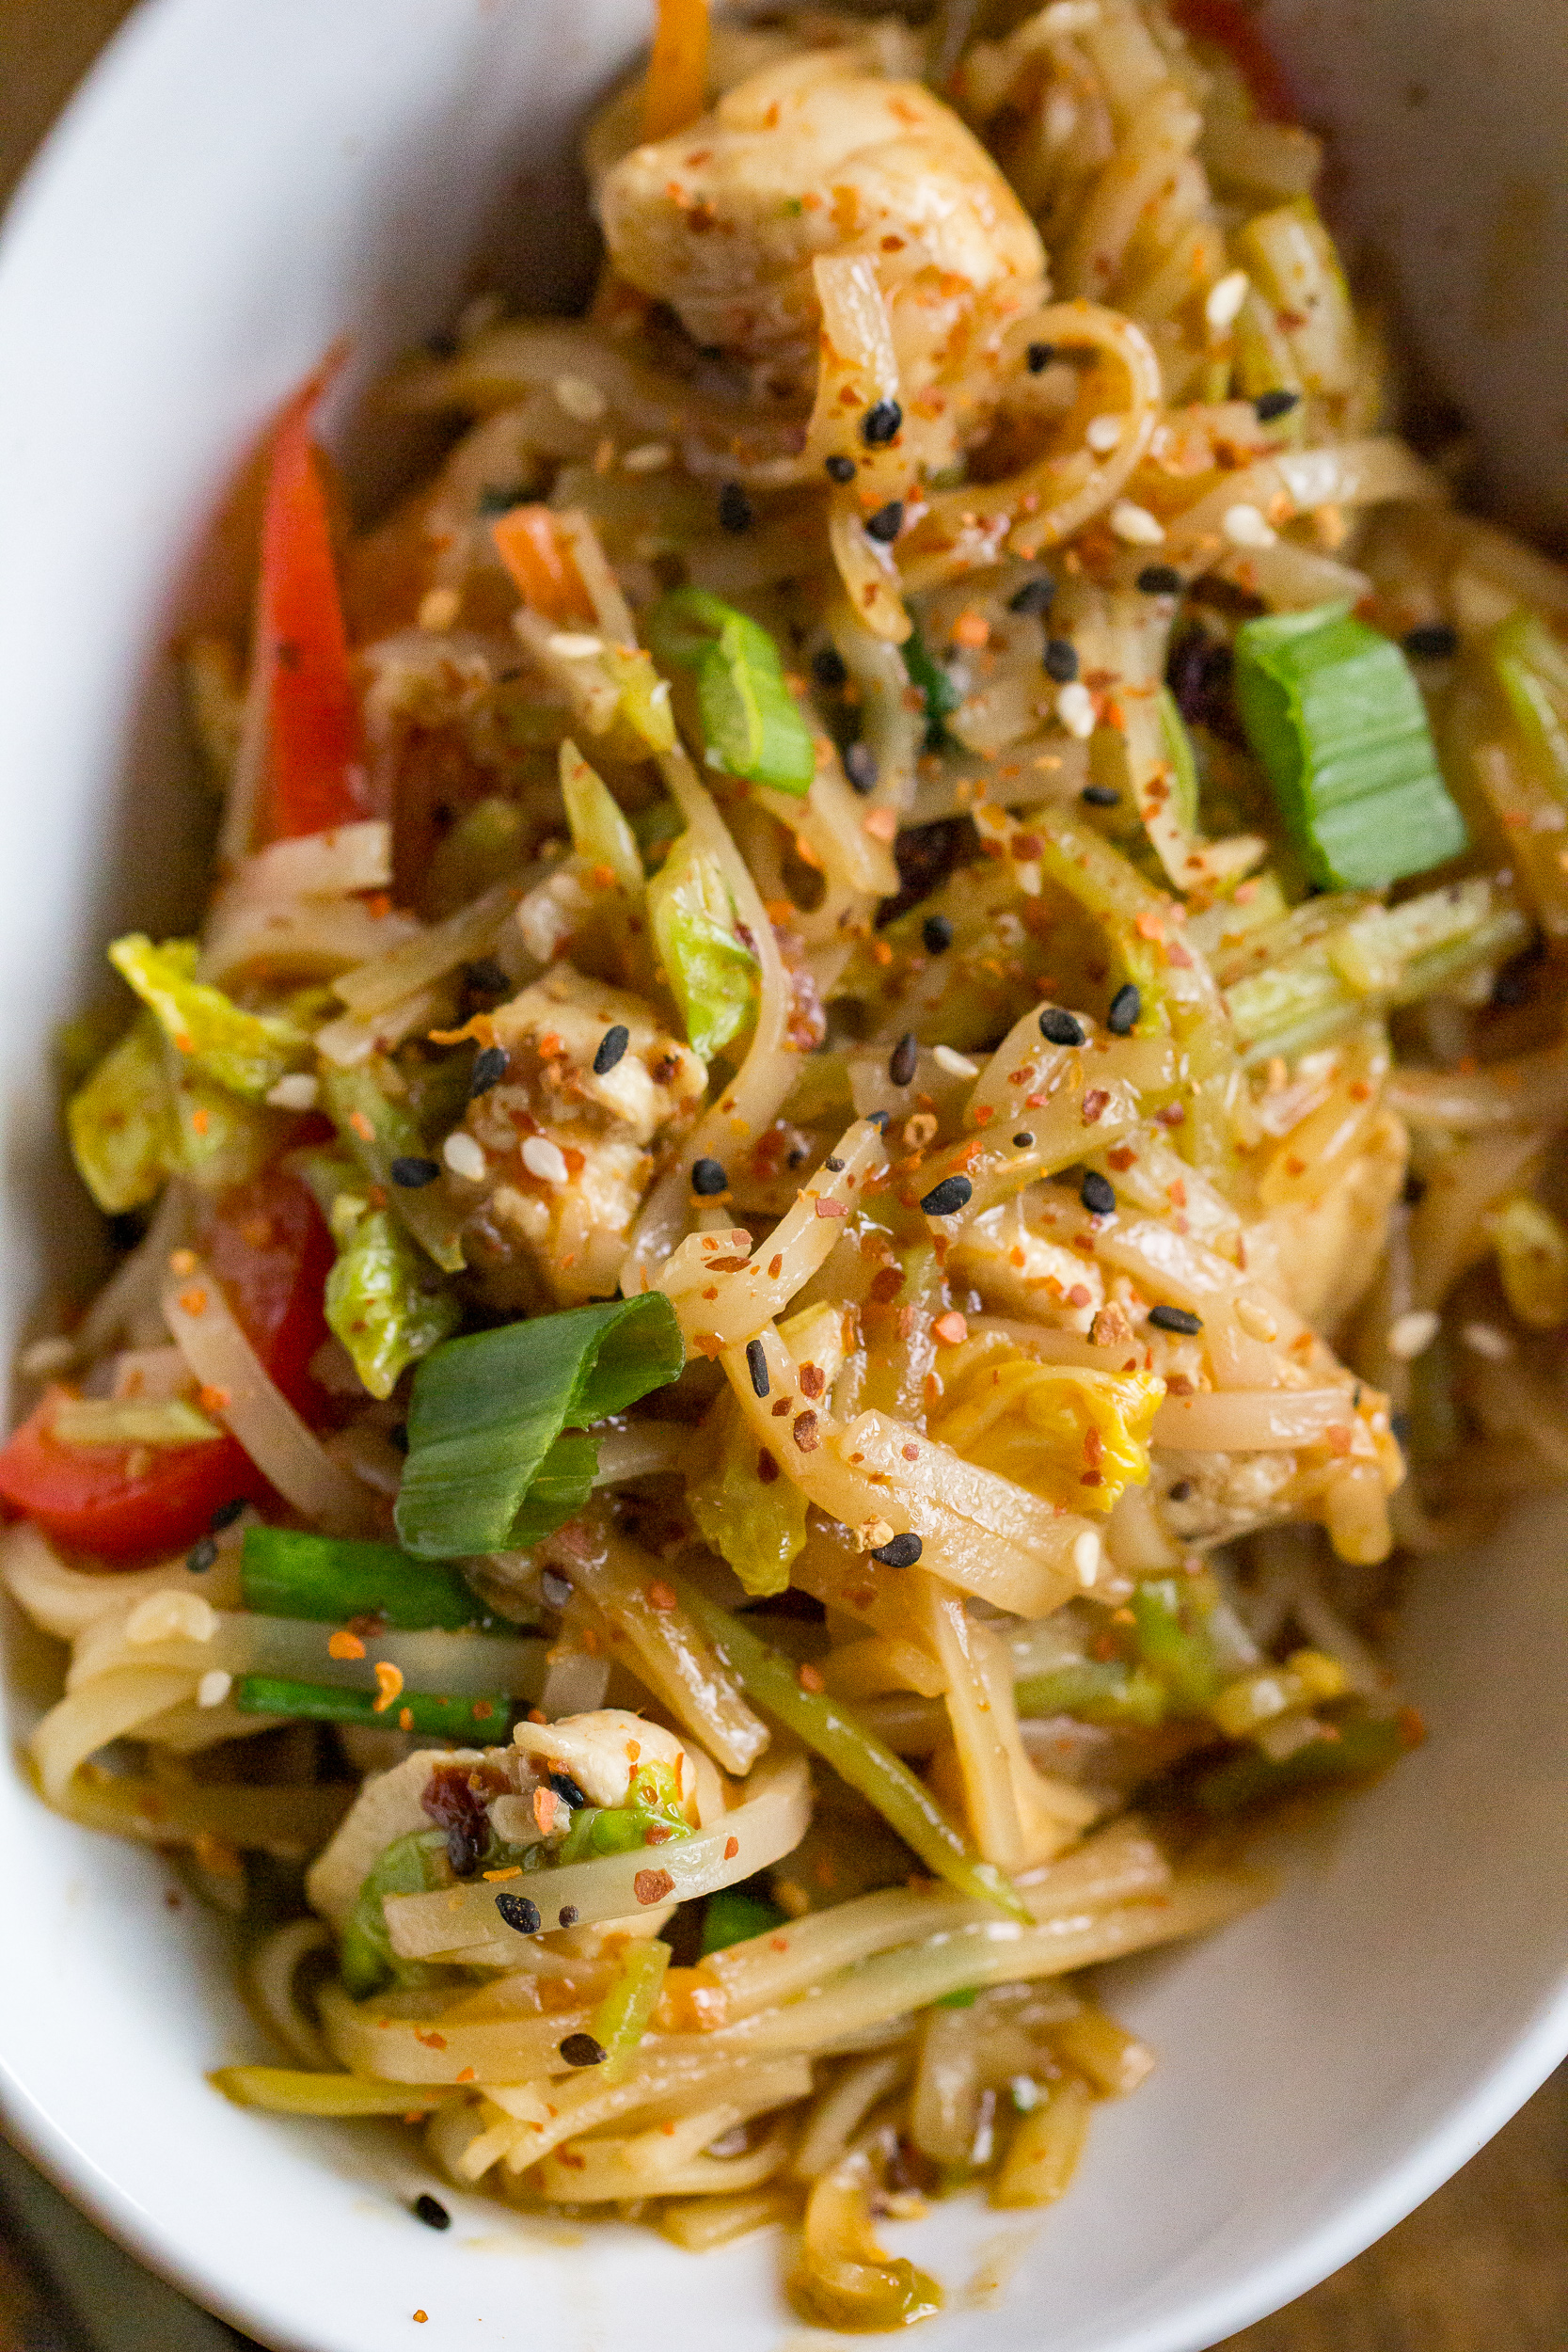 https://www.orwhateveryoudo.com/wp-content/uploads/2019/12/Chicken-and-Rice-Noodles-04.jpg